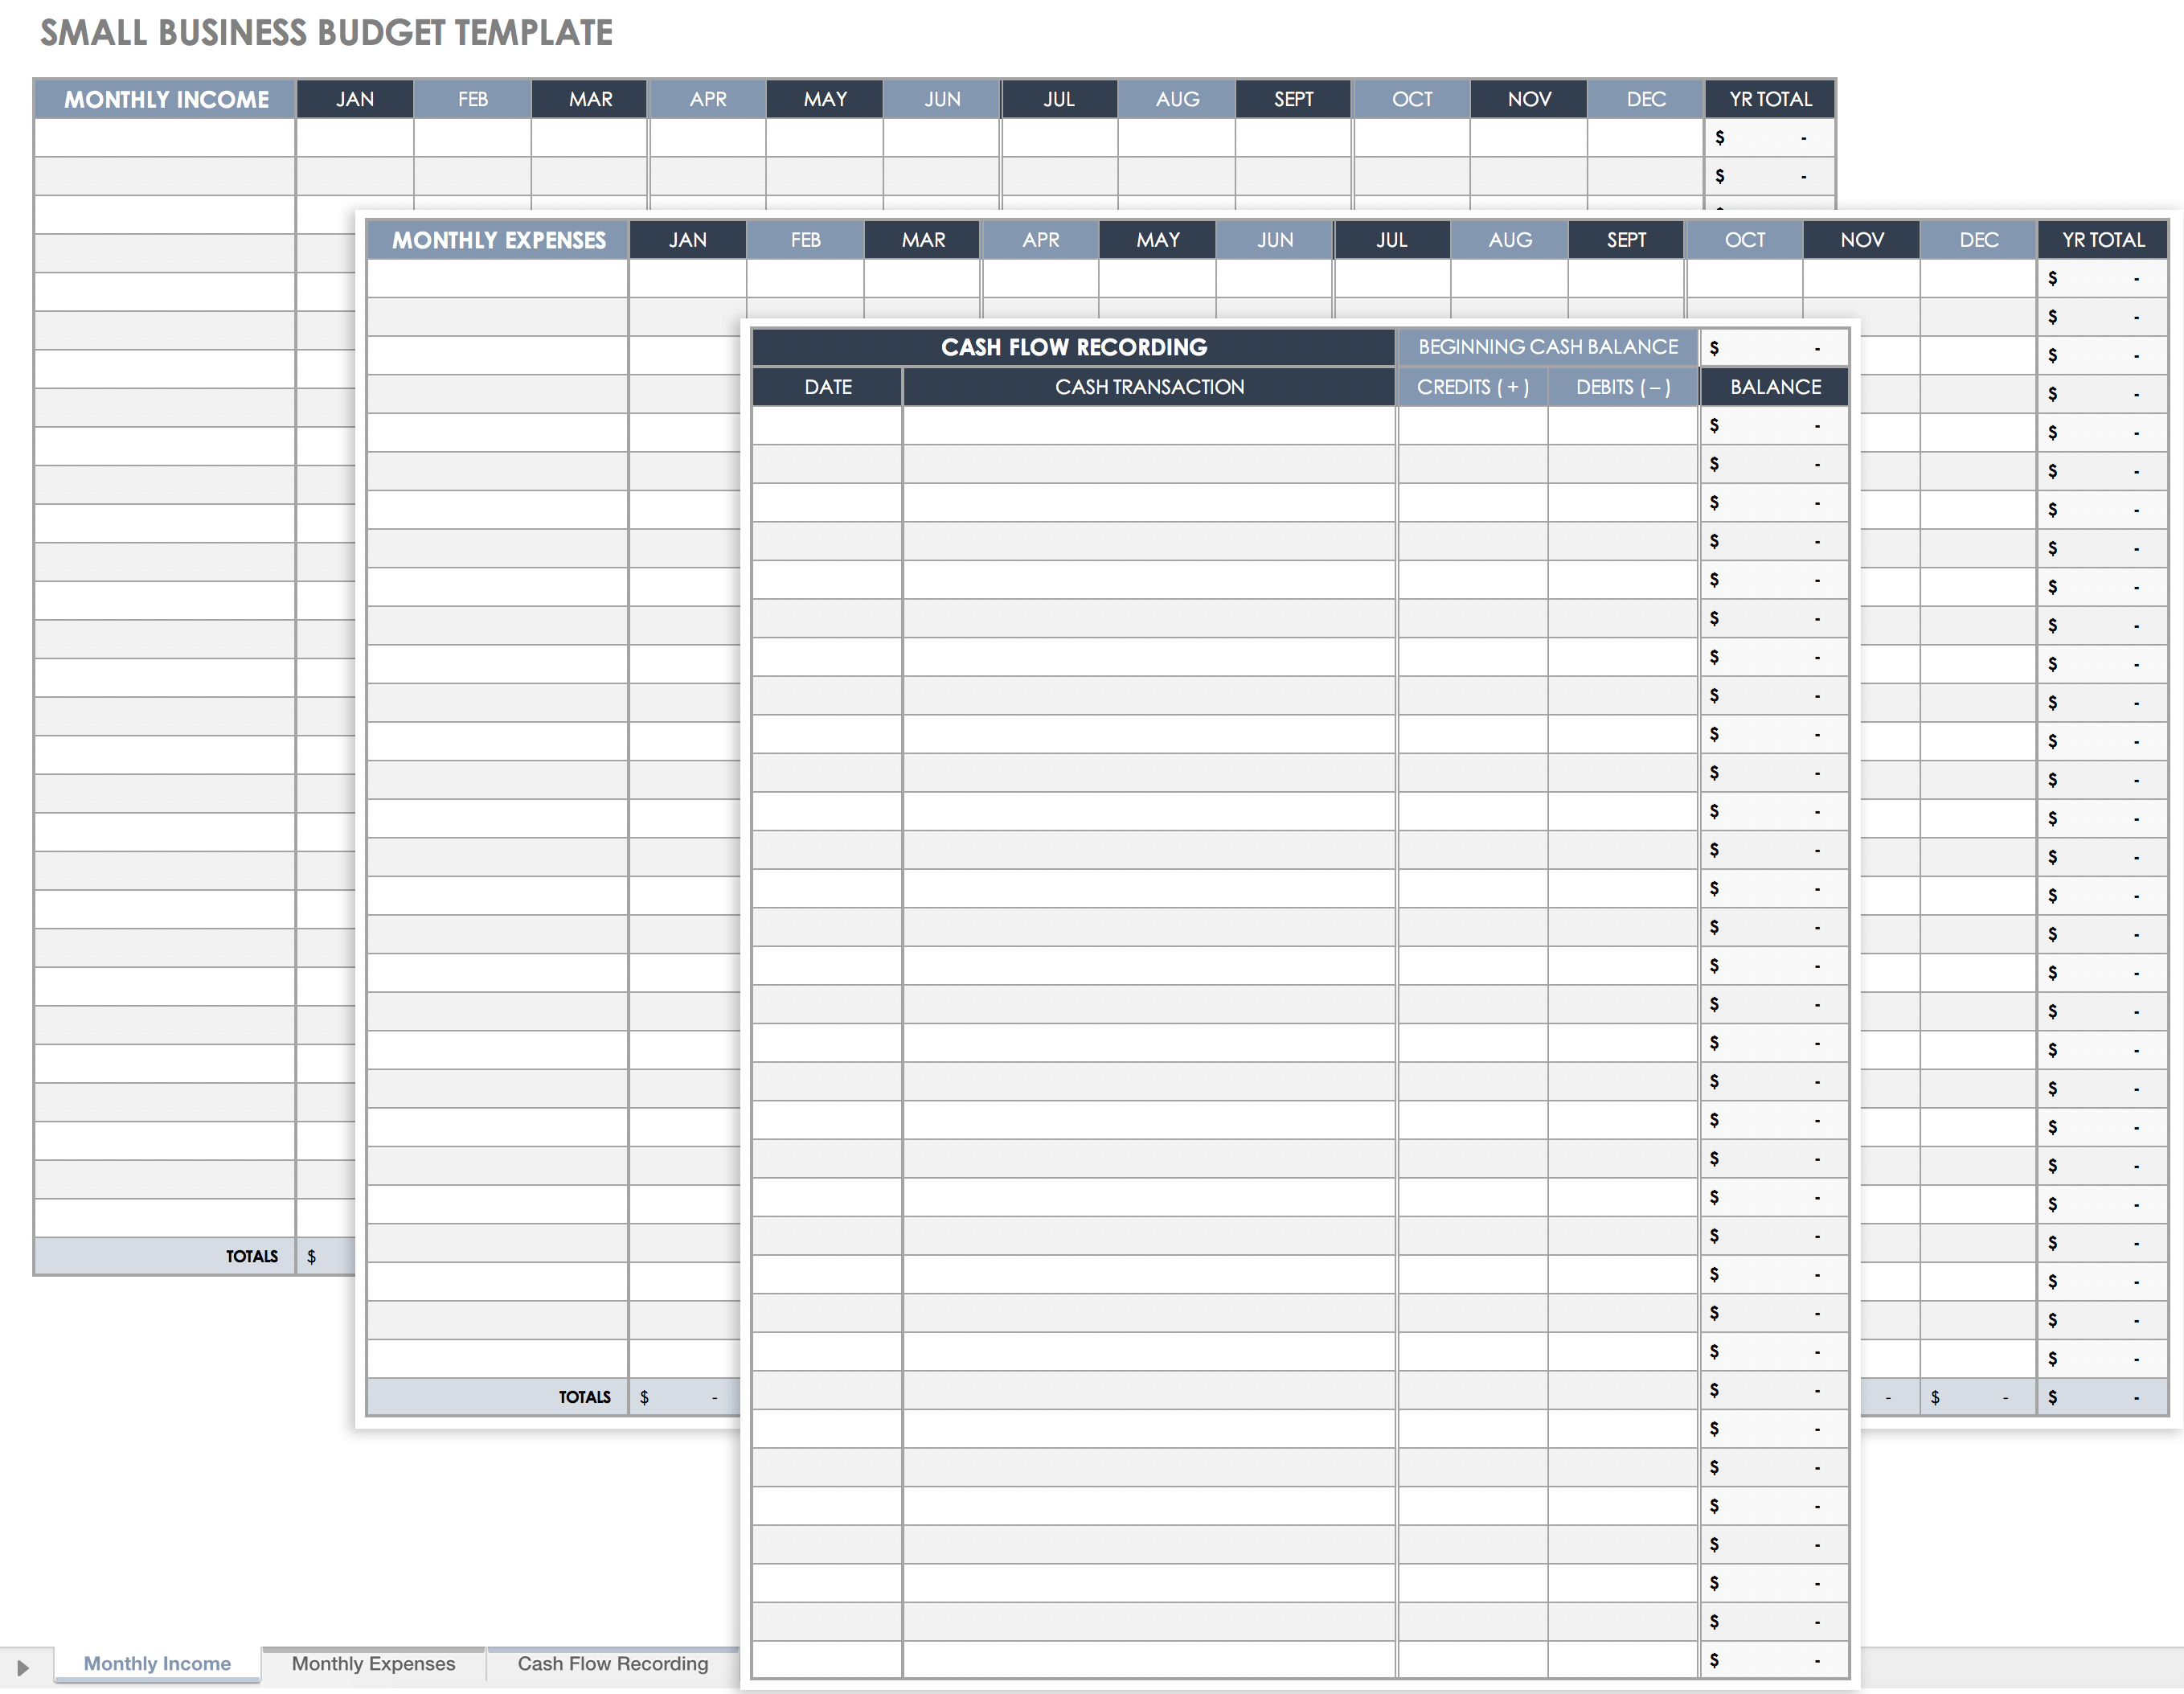 Free Small Business Budget Templates  Smartsheet Pertaining To Startup Company Budget Template Throughout Startup Company Budget Template